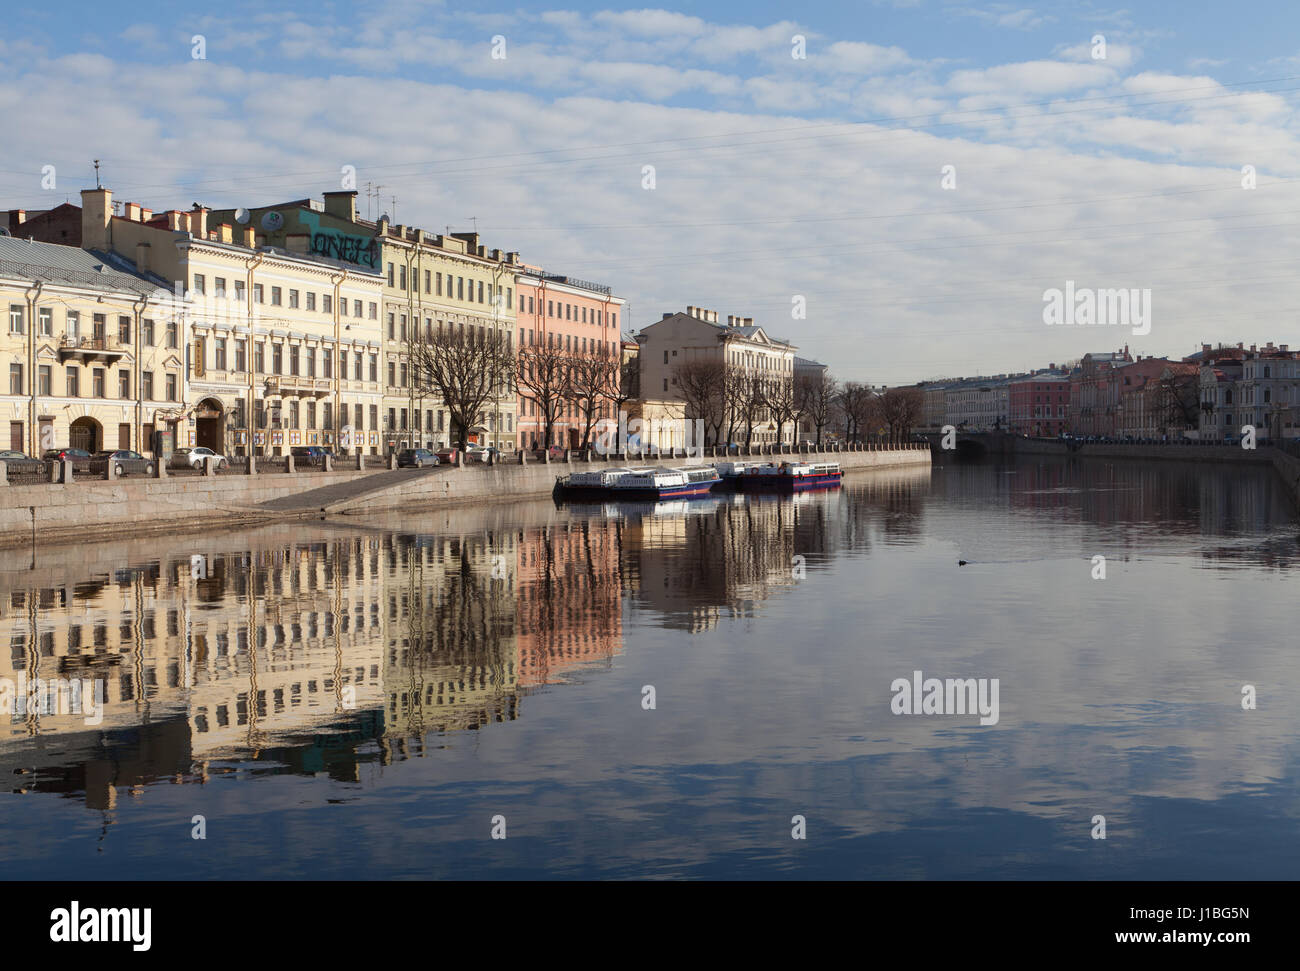 Fontanka River at the morning, St. Petersburg, Russia. Stock Photo